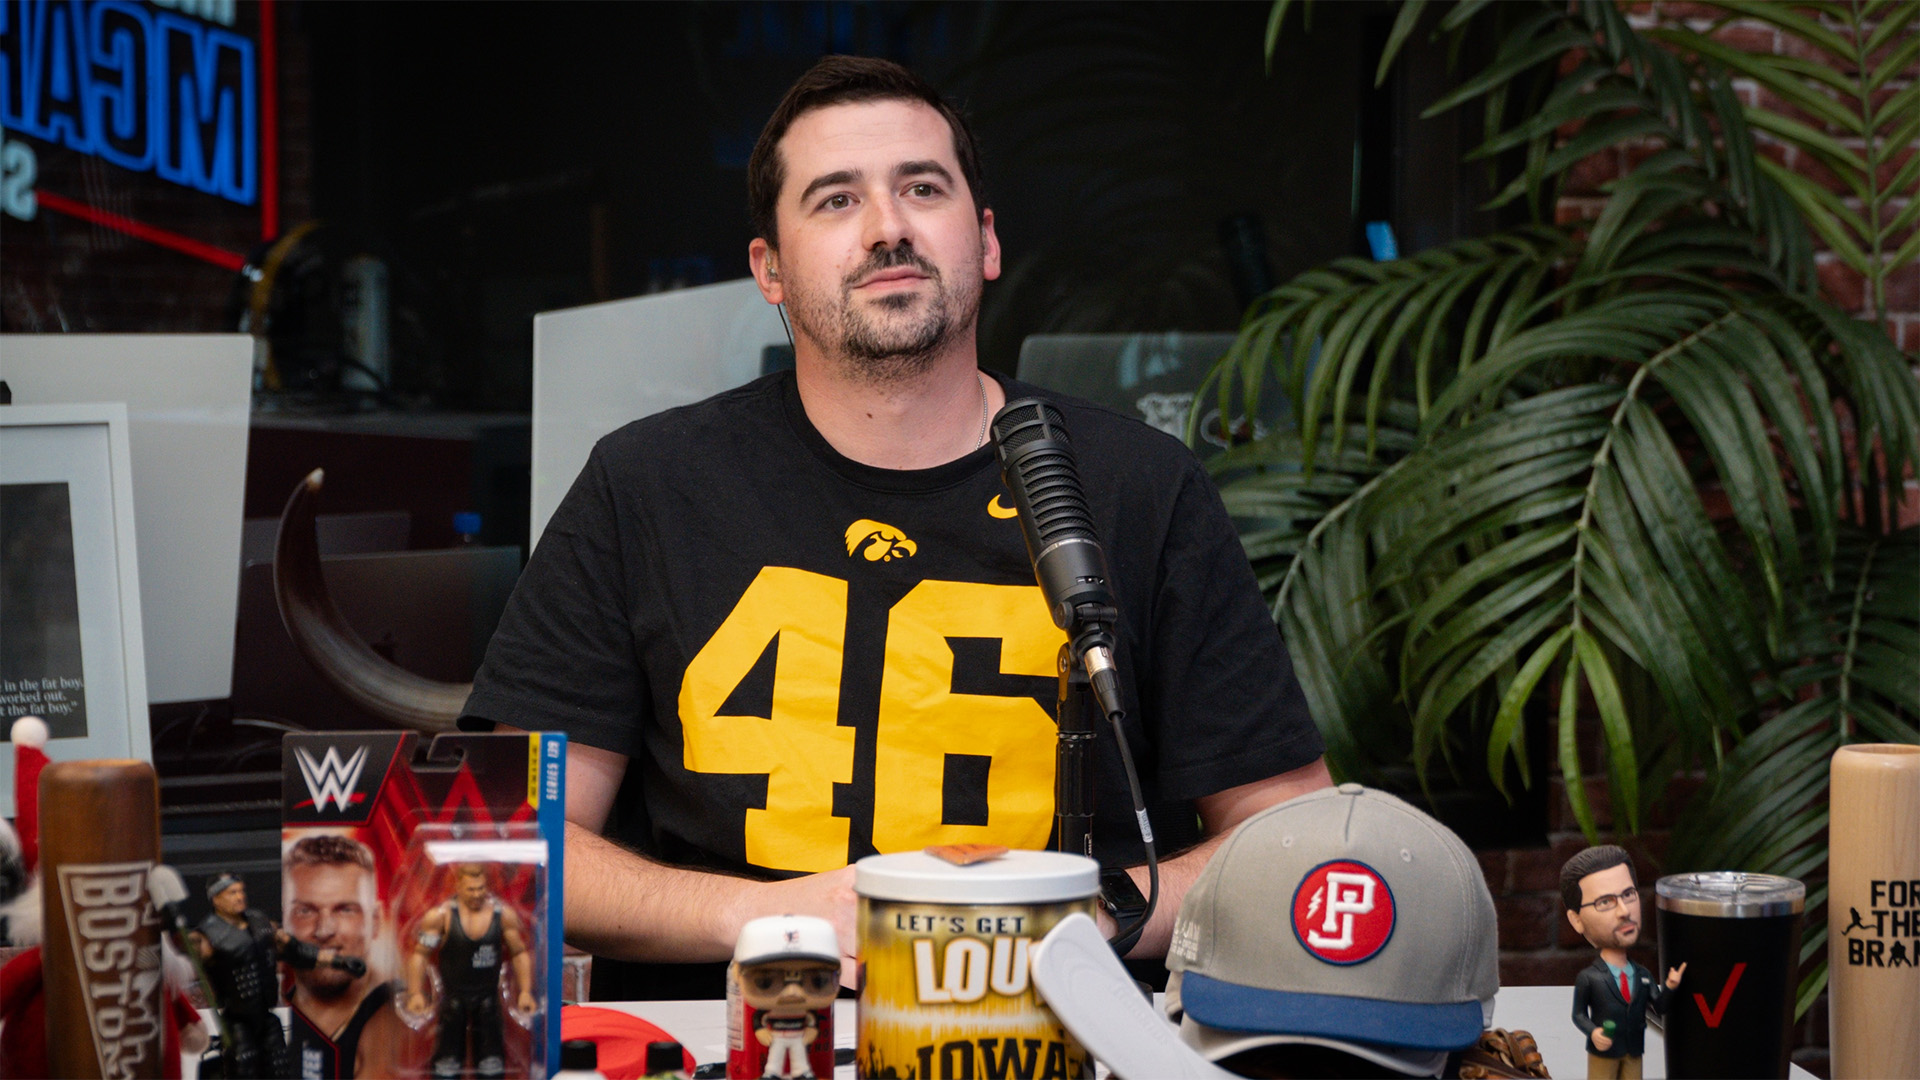 University of Iowa alumnus Ty Schmit on the set of the Pat McAfee Show, which he produces